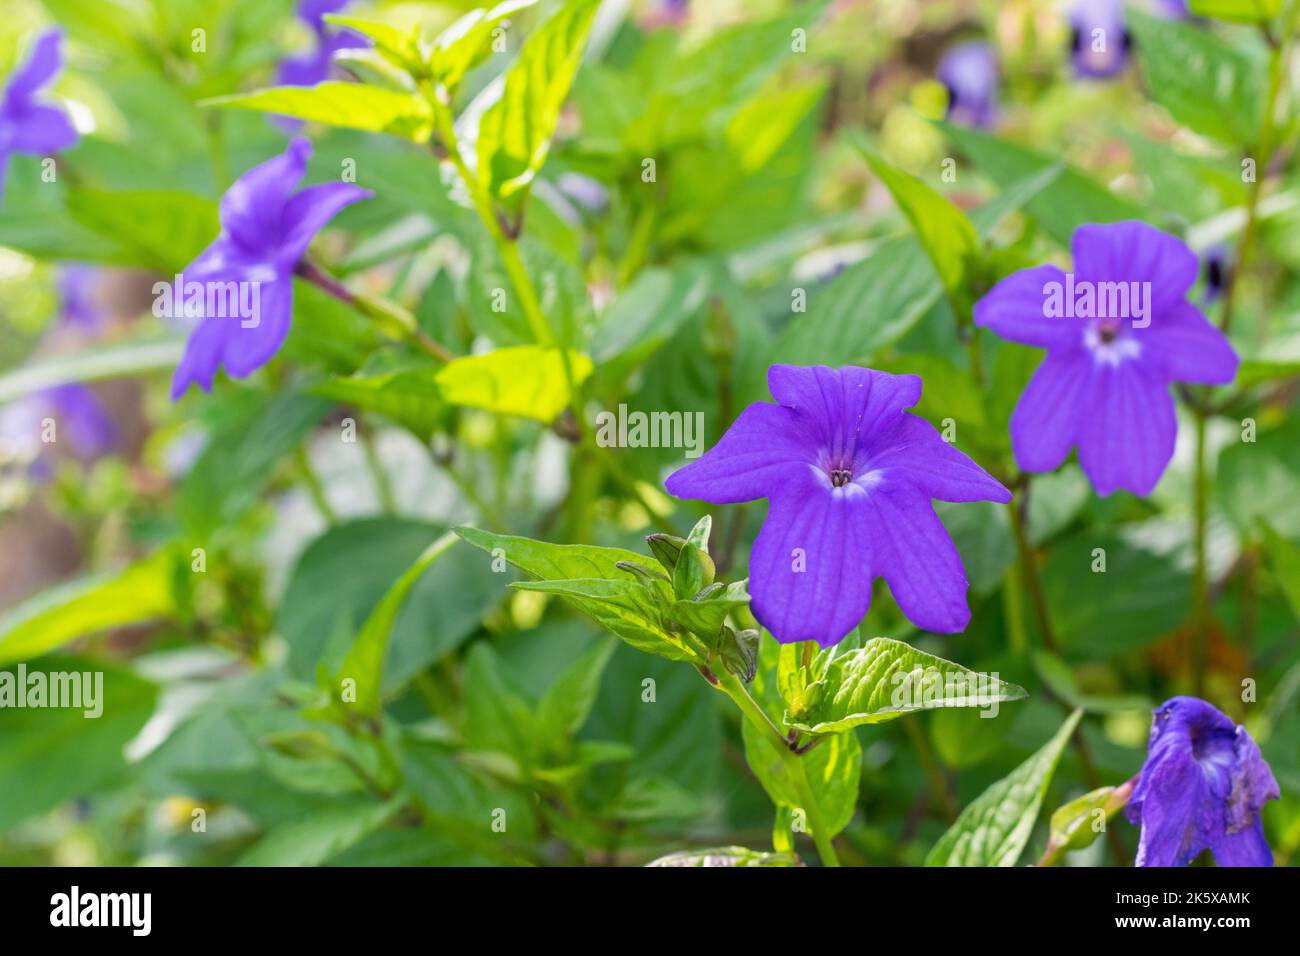 peasant flower garden, Browallia speciosa or purple flower with white center. Phanerogamous plant belonging to the Solanaceae family. It is native to Stock Photo